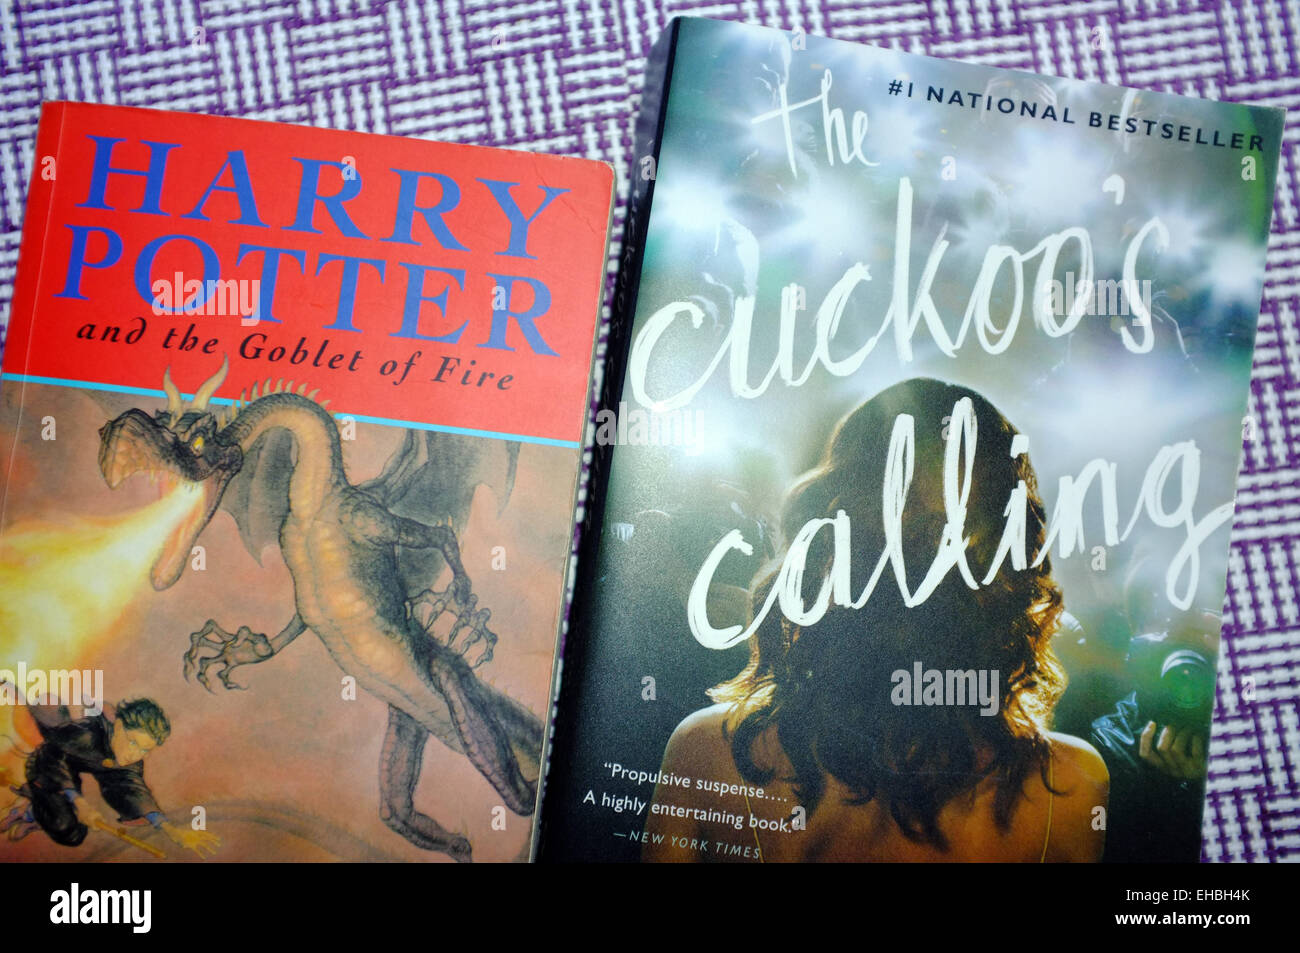 The Cuckoo's Calling and a book from the Harry Potter series, both books by the author JK Rowling. Stock Photo